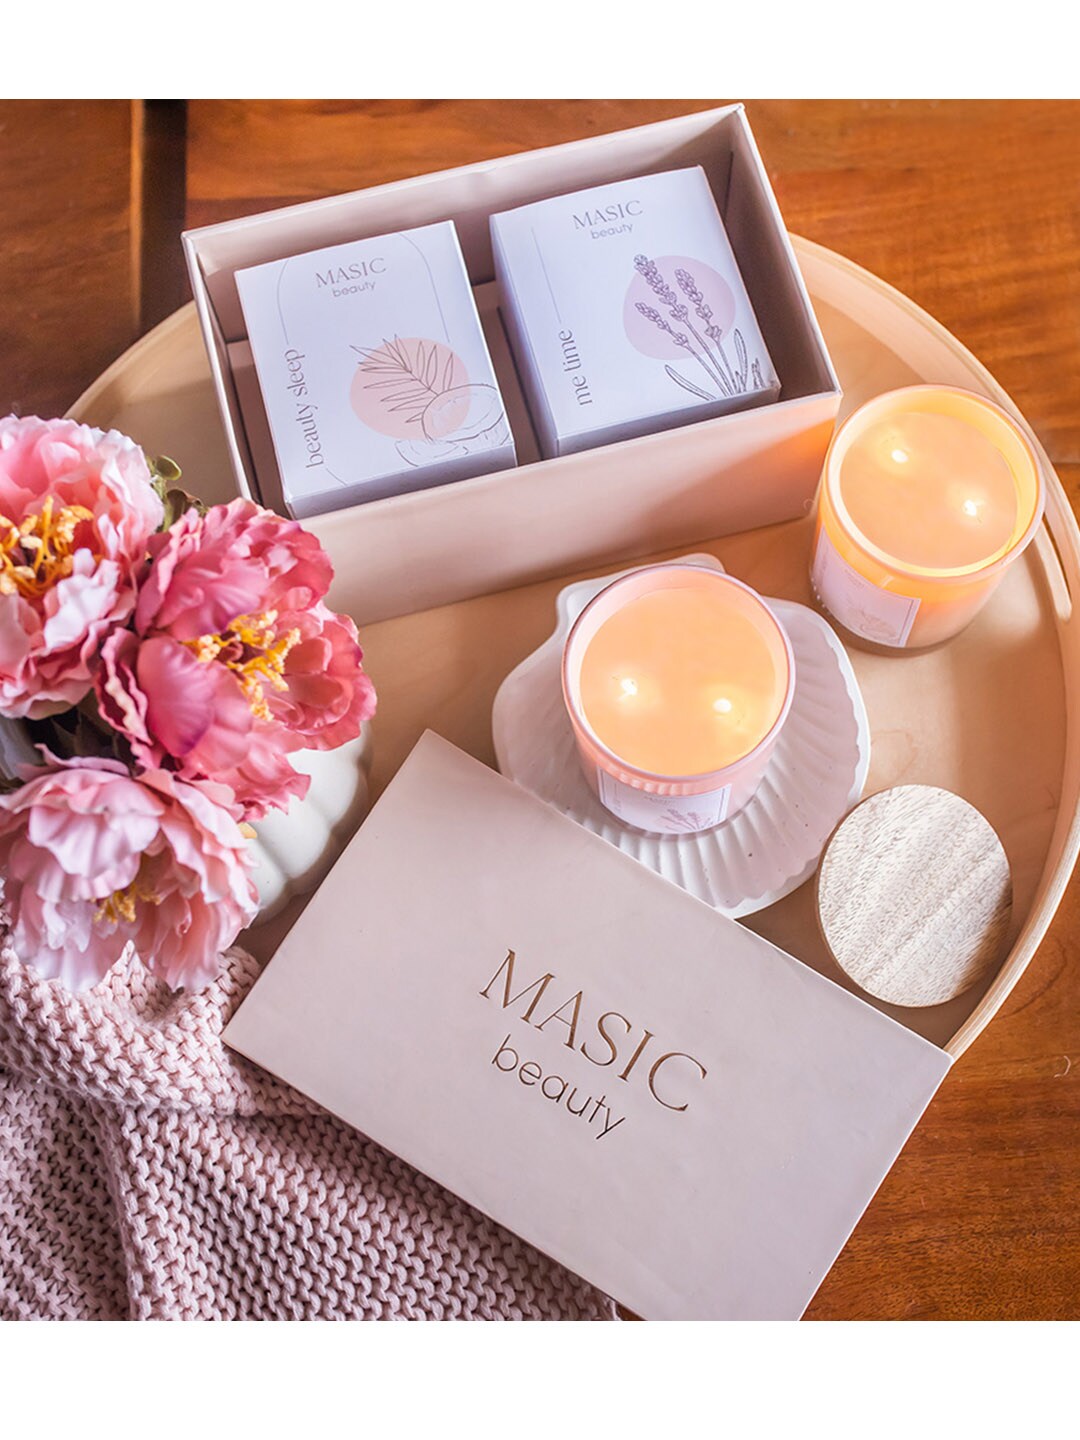 MASIC beauty 2-Wick Candles Self Care Bundle - Beauty Sleep & Me Time Candles - 200g Each Price in India